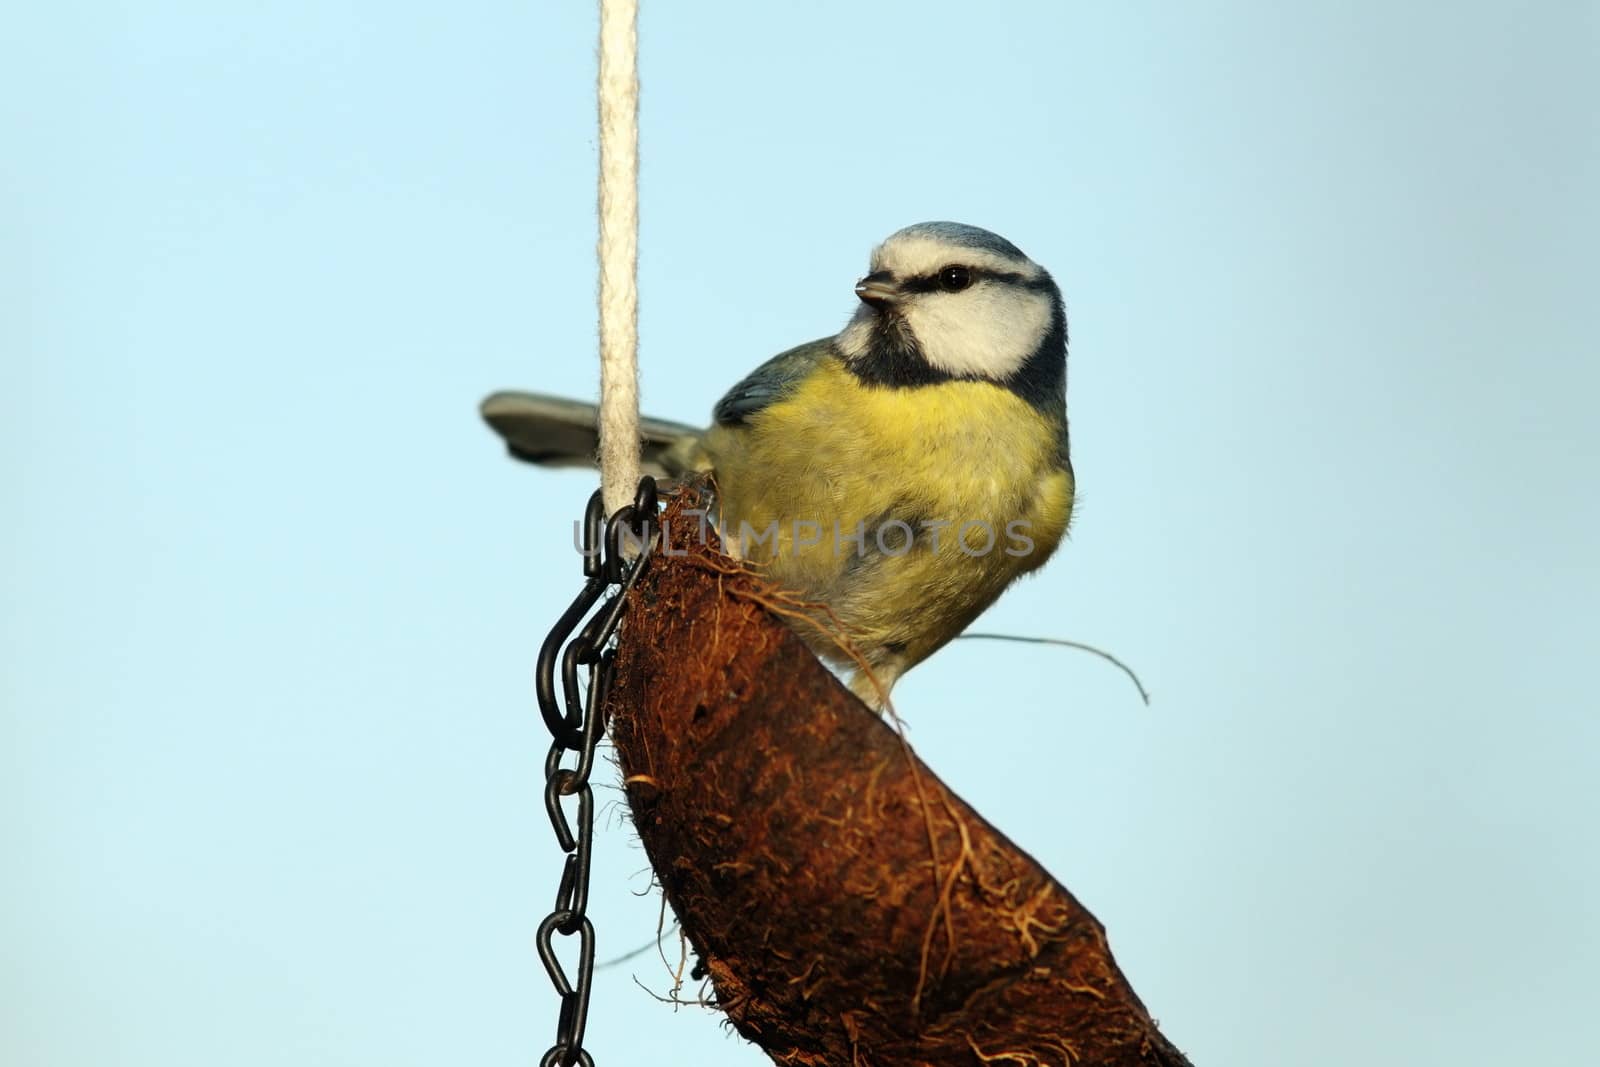 tit on fat feeder by taviphoto